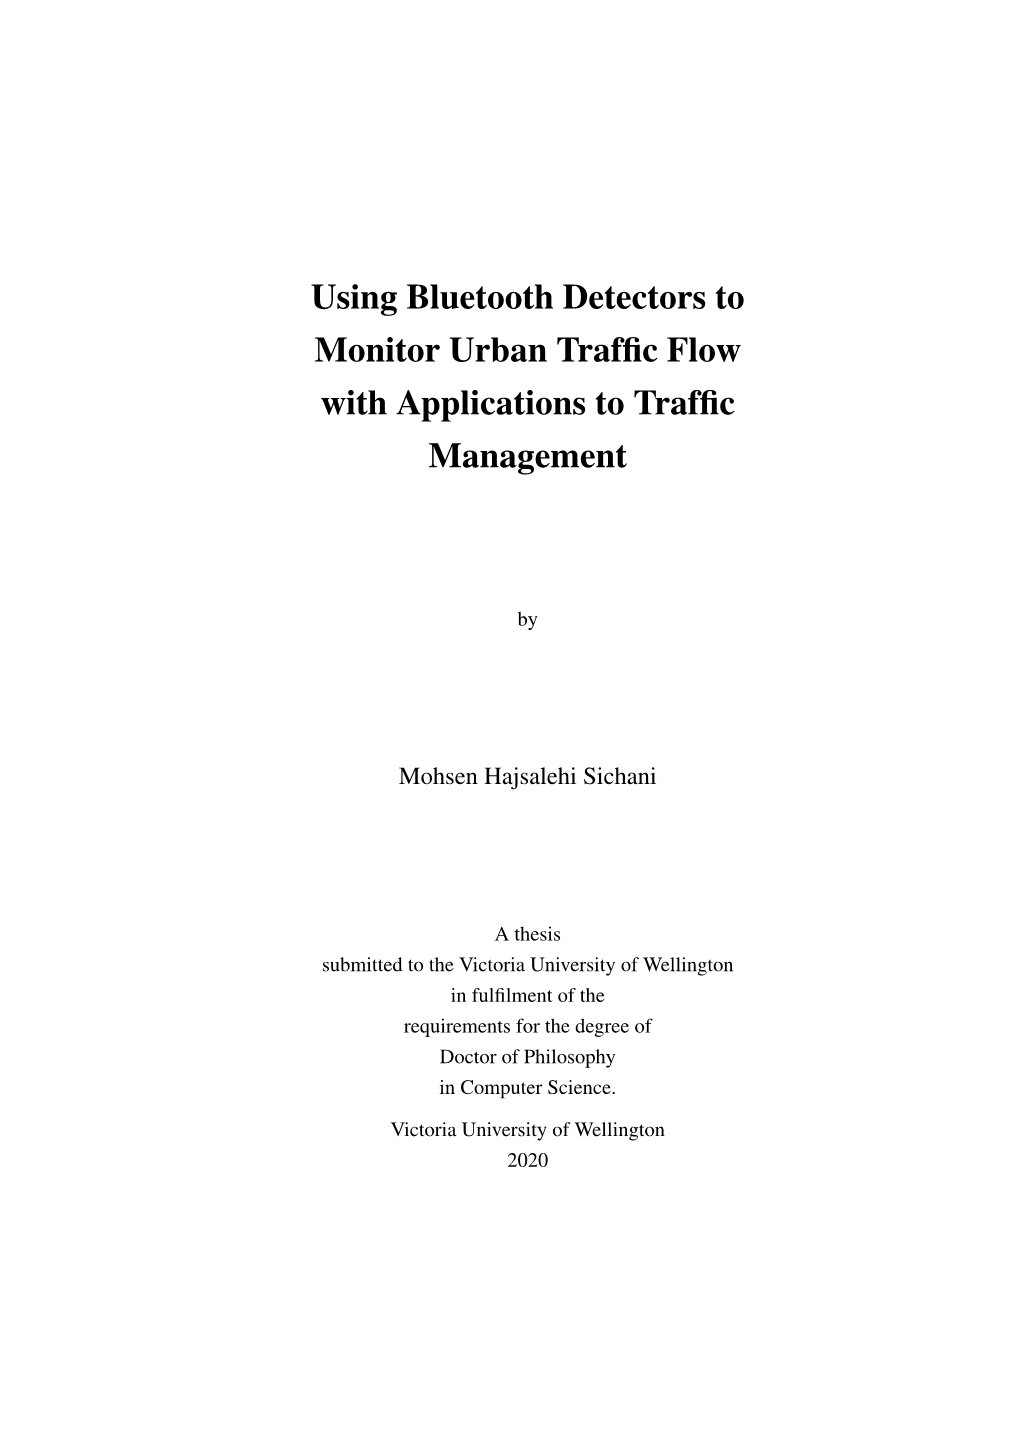 Using Bluetooth Detectors to Monitor Urban Traffic Flow with Applications